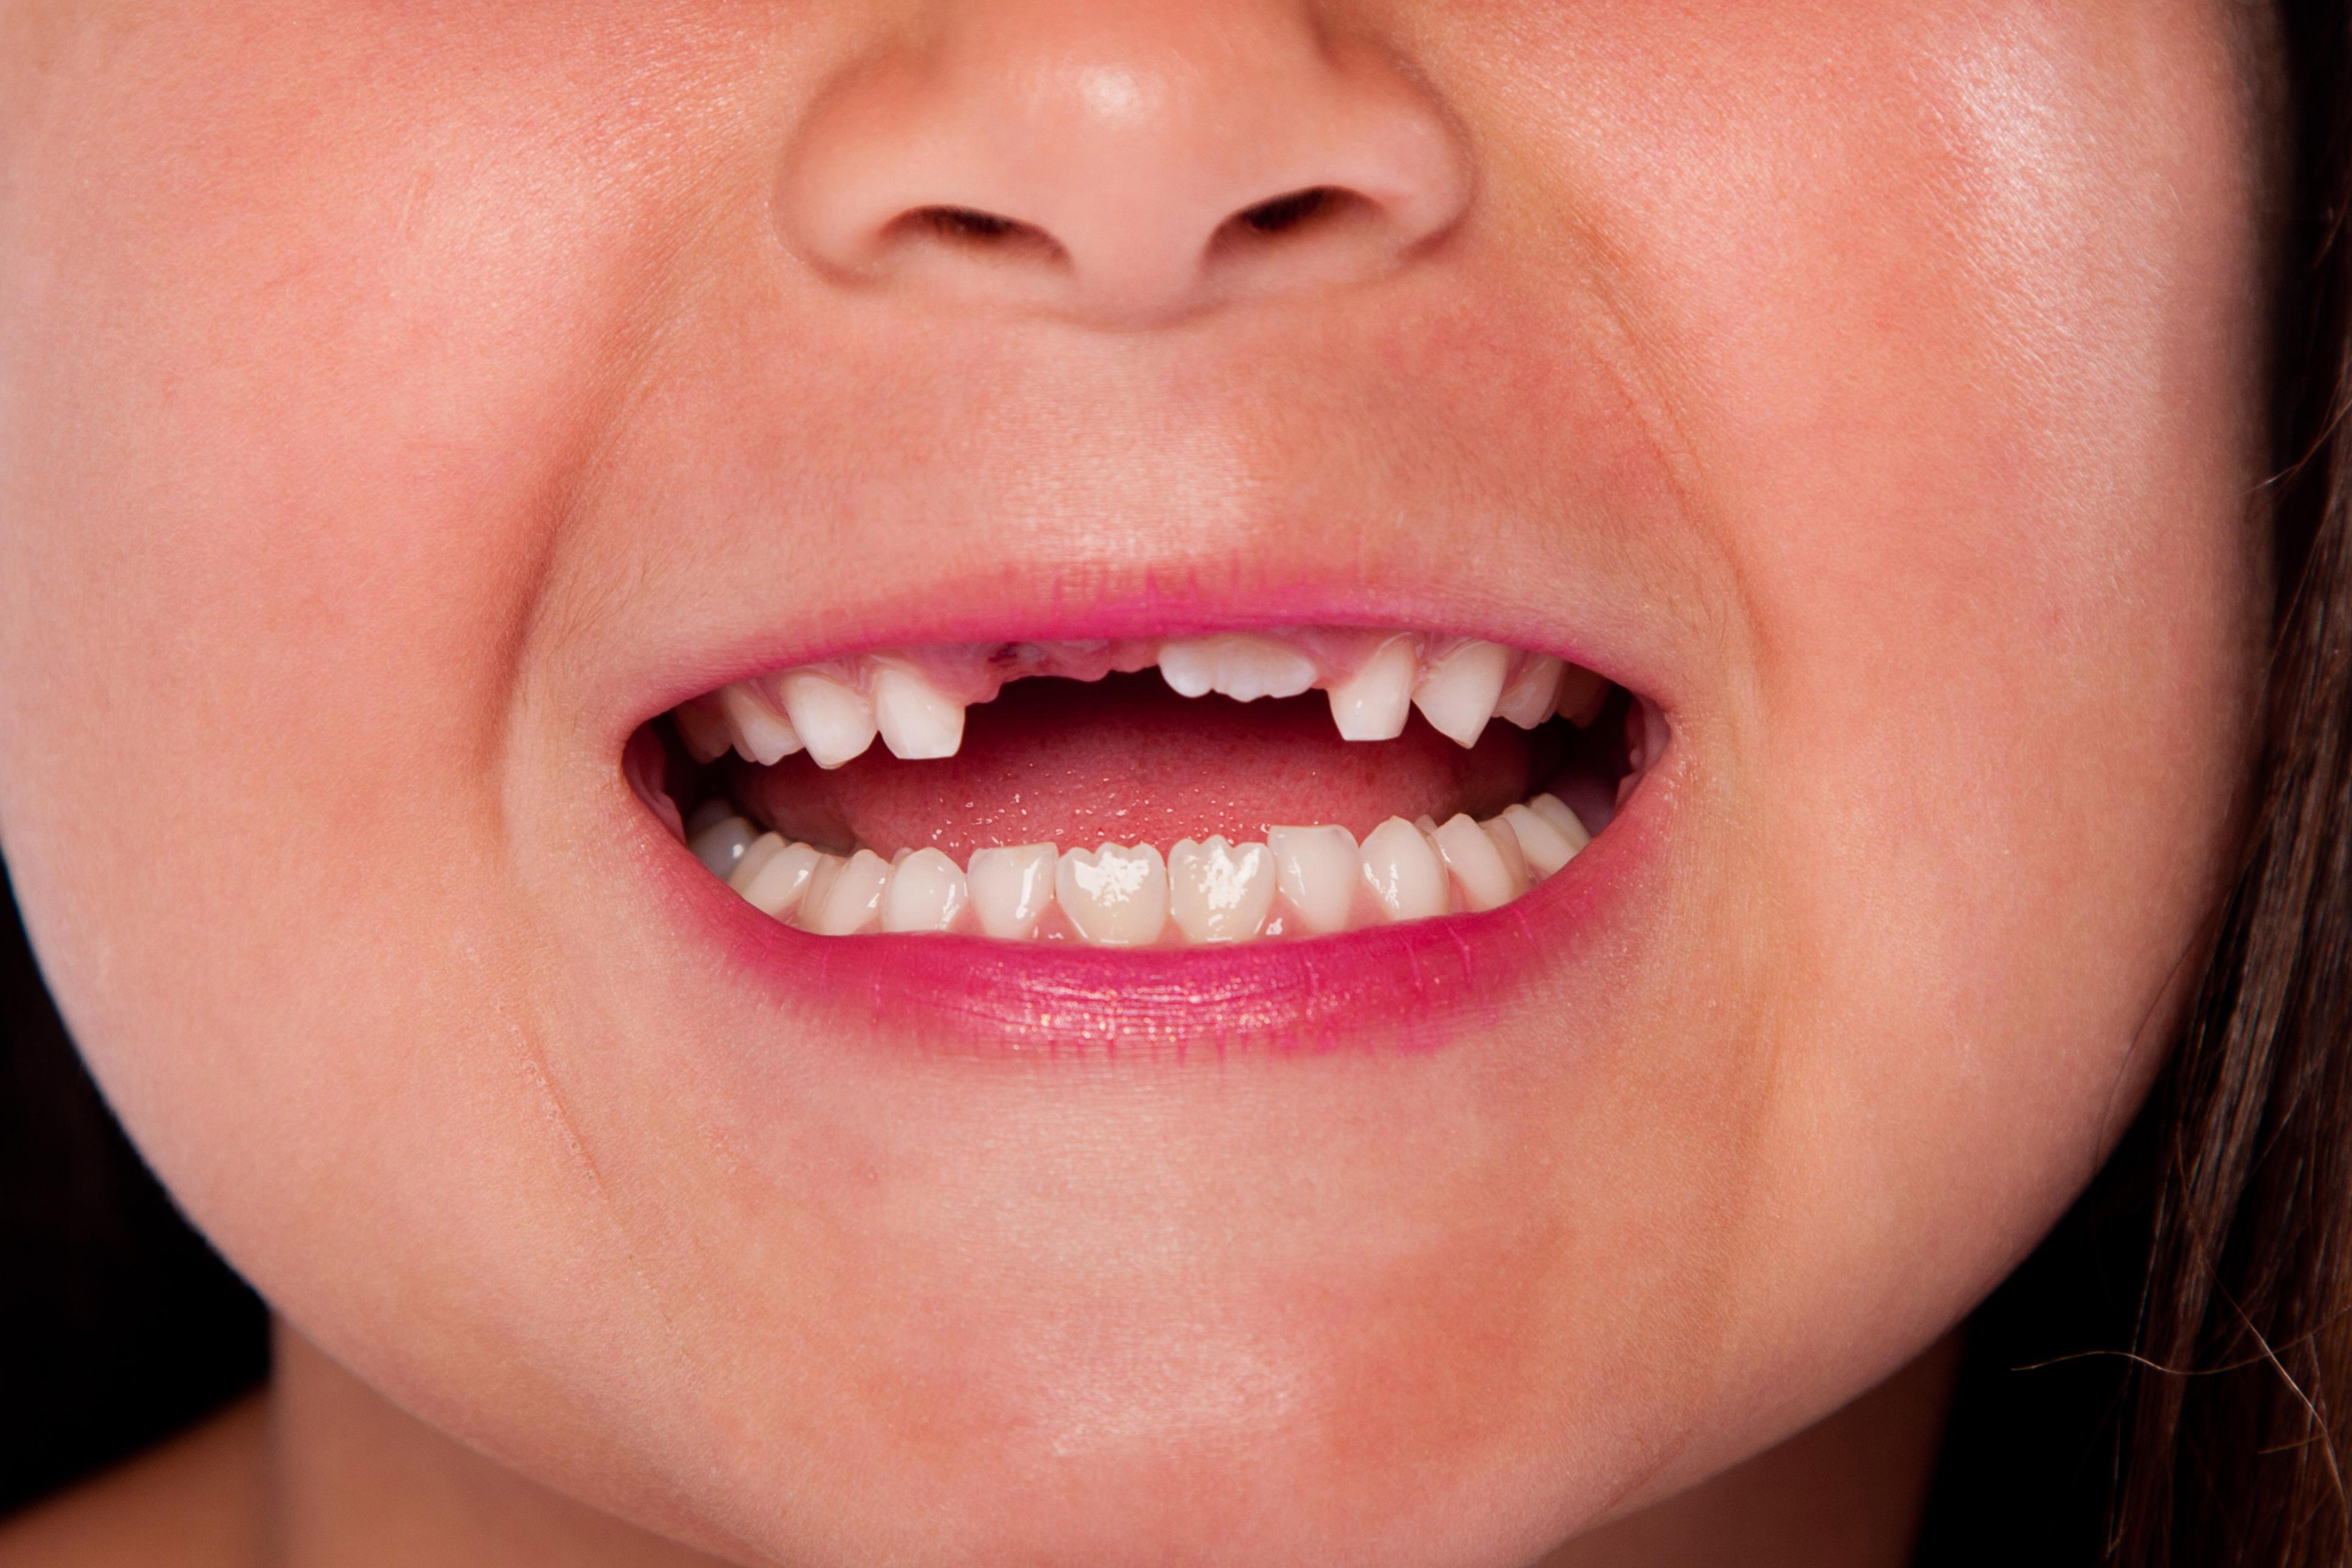 When Do Children Lose Their Baby Teeth: A Definitive Guide